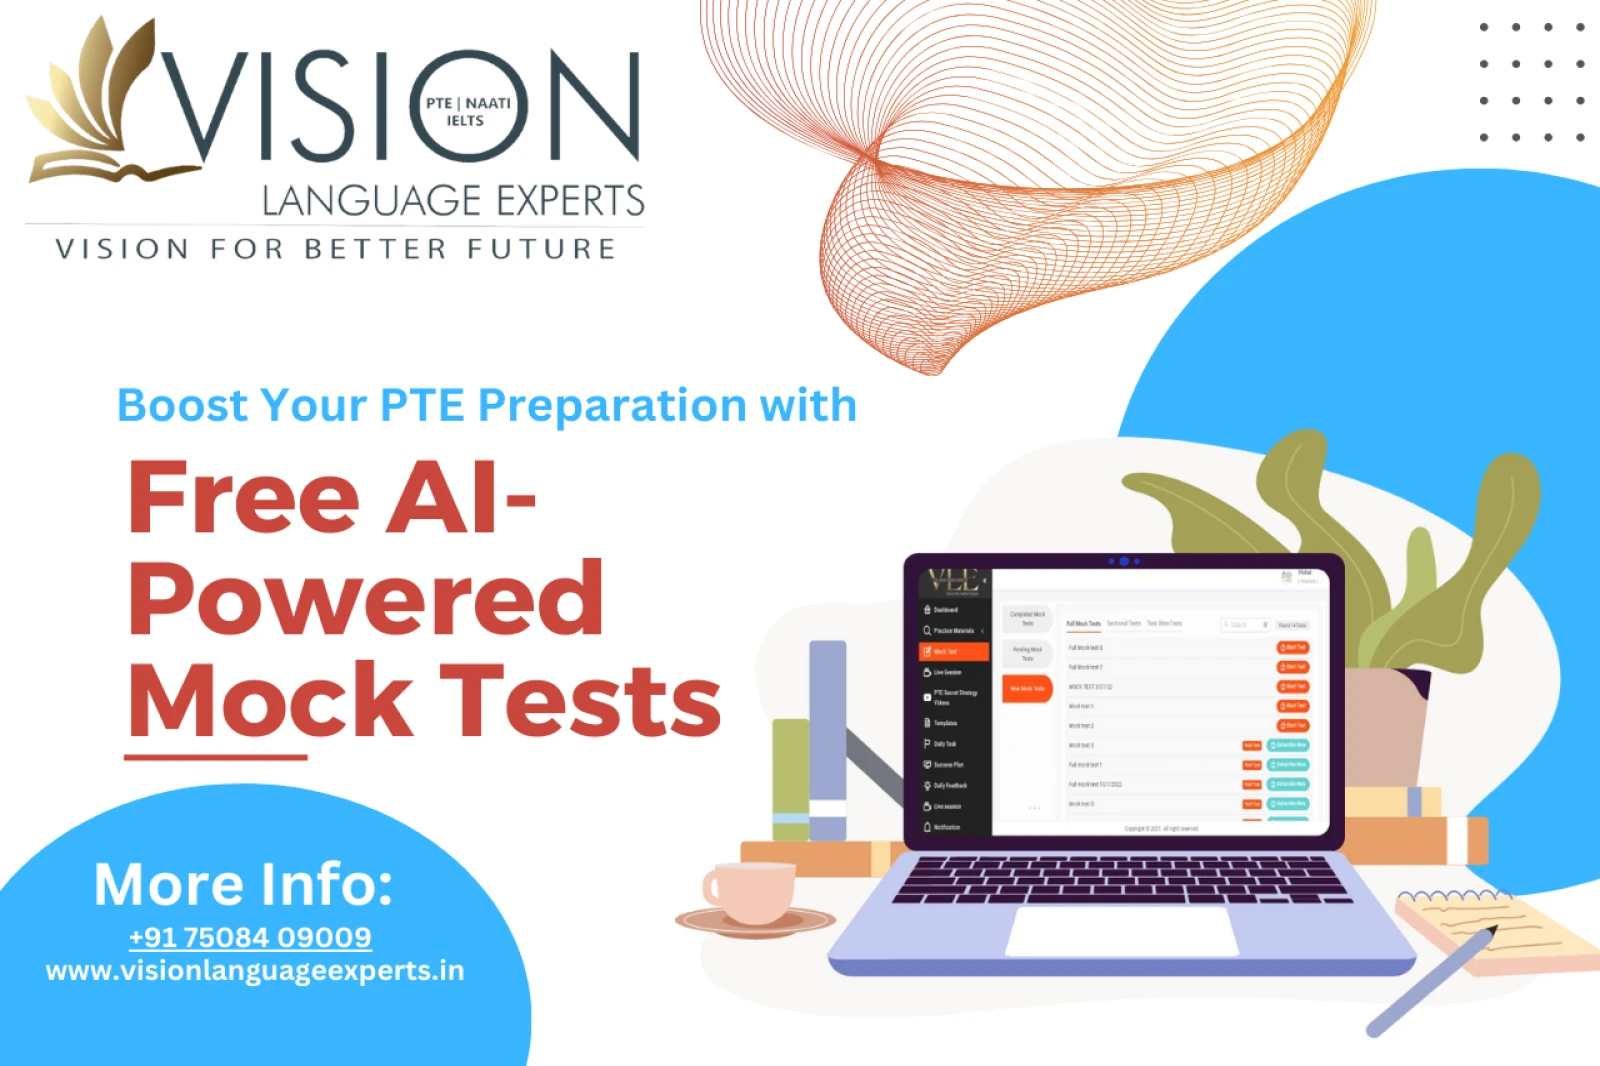 Boost Your PTE Preparation with Free AI-Powered Mock Tests and Instant Scores